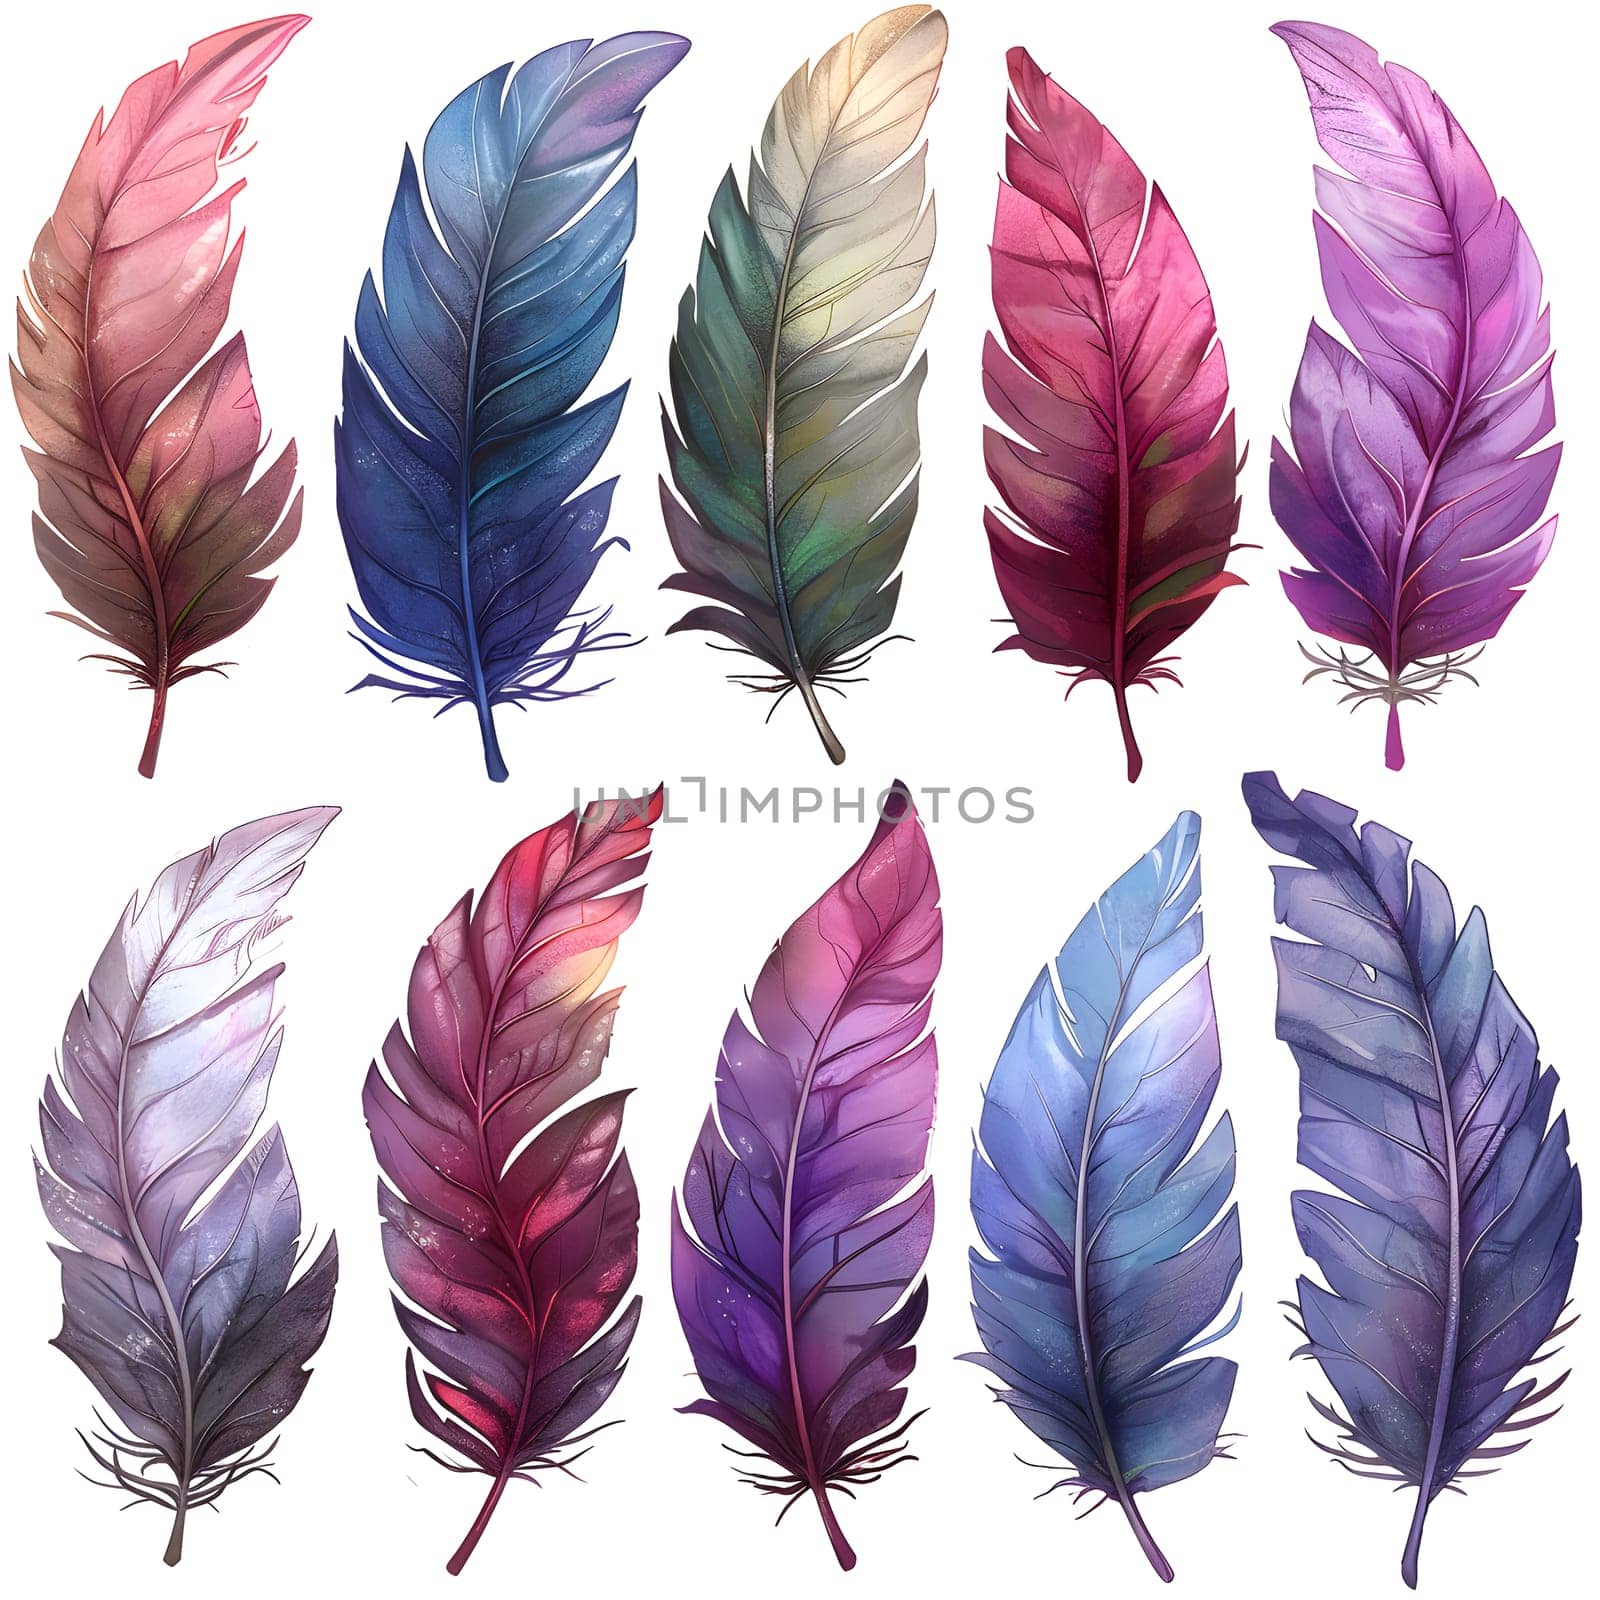 Vivid violet and magenta feathers on white background, natural materials art by Nadtochiy